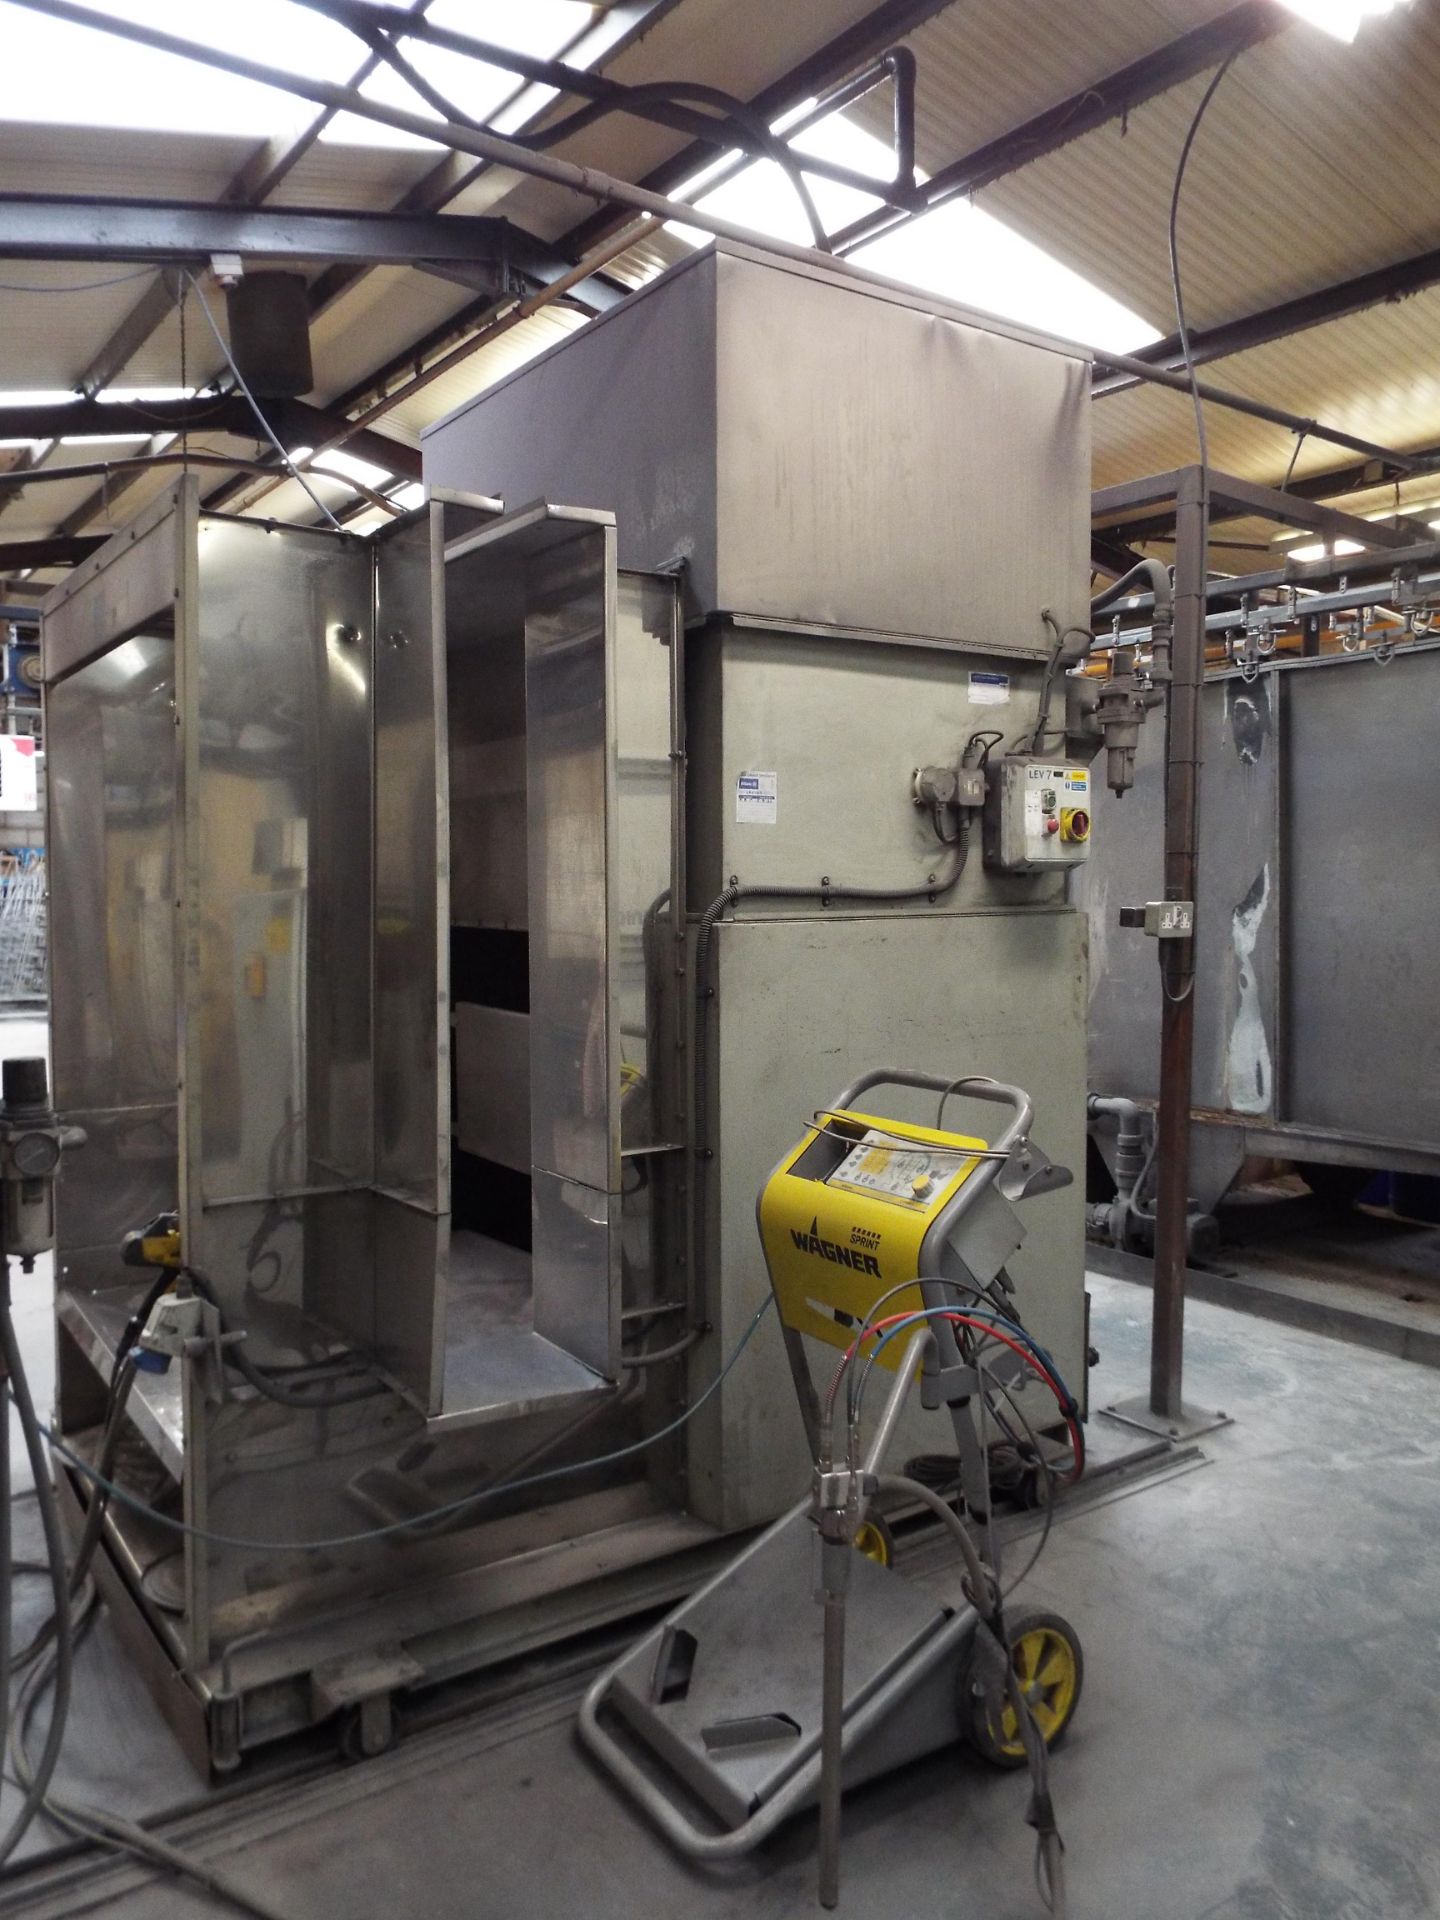 Conveyorised & Automated Powder Coating Line cw On Line Pre-Treat Chamber & Support Equipment. - Image 27 of 43